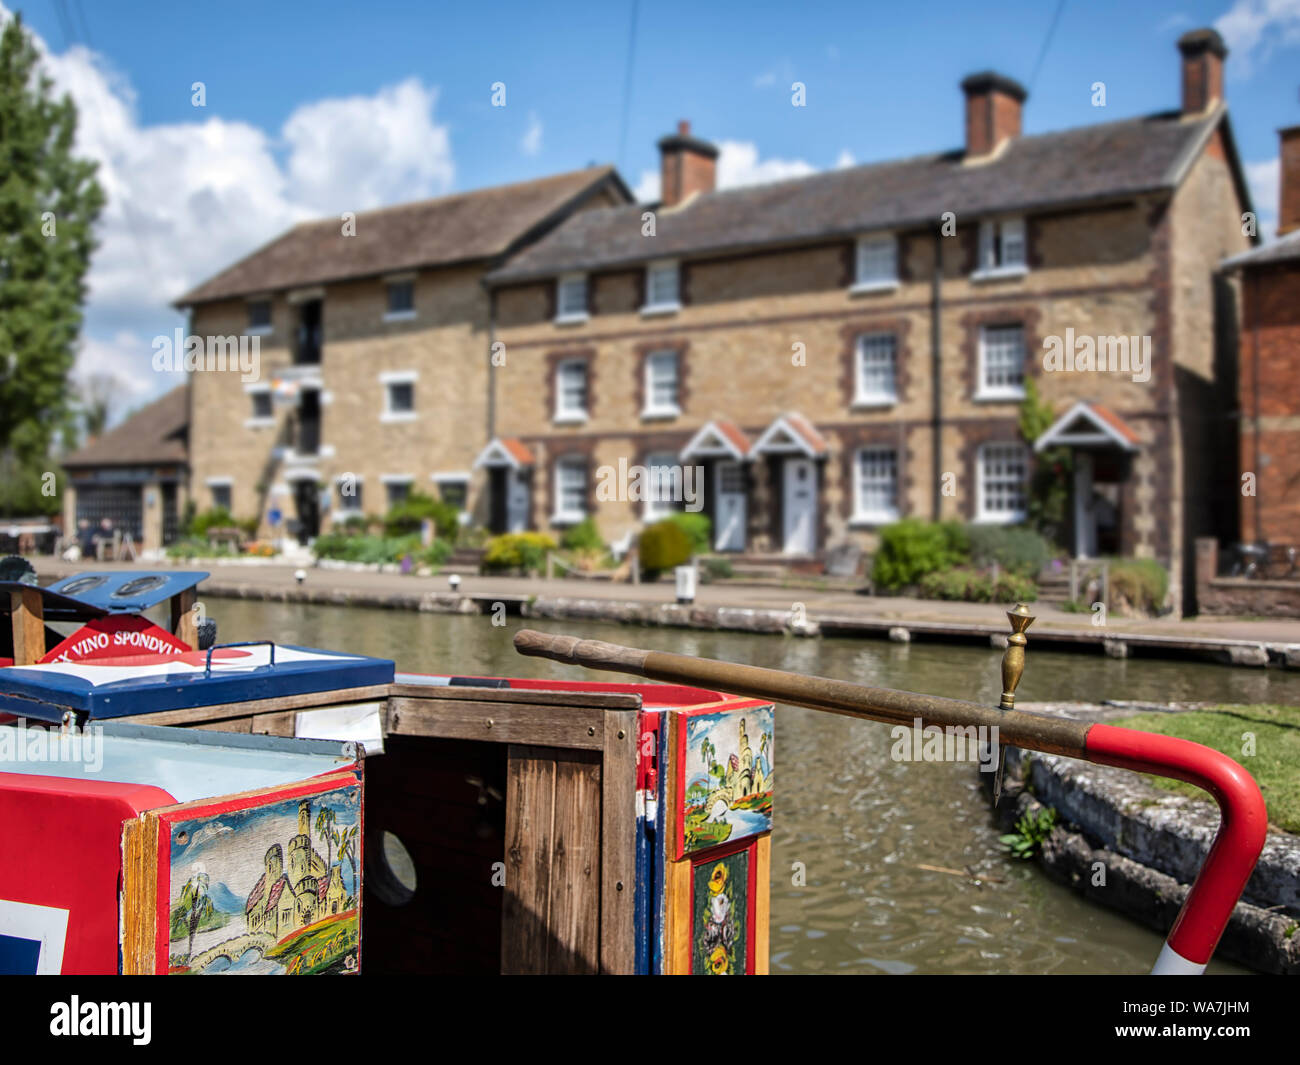 STOKE BRUERNE, NORTHAMPTONSHIRE, UK - MAY 10, 2019:  Pretty canalside cottages seen above colourful tiller and traditional painting on narrowboat Stock Photo